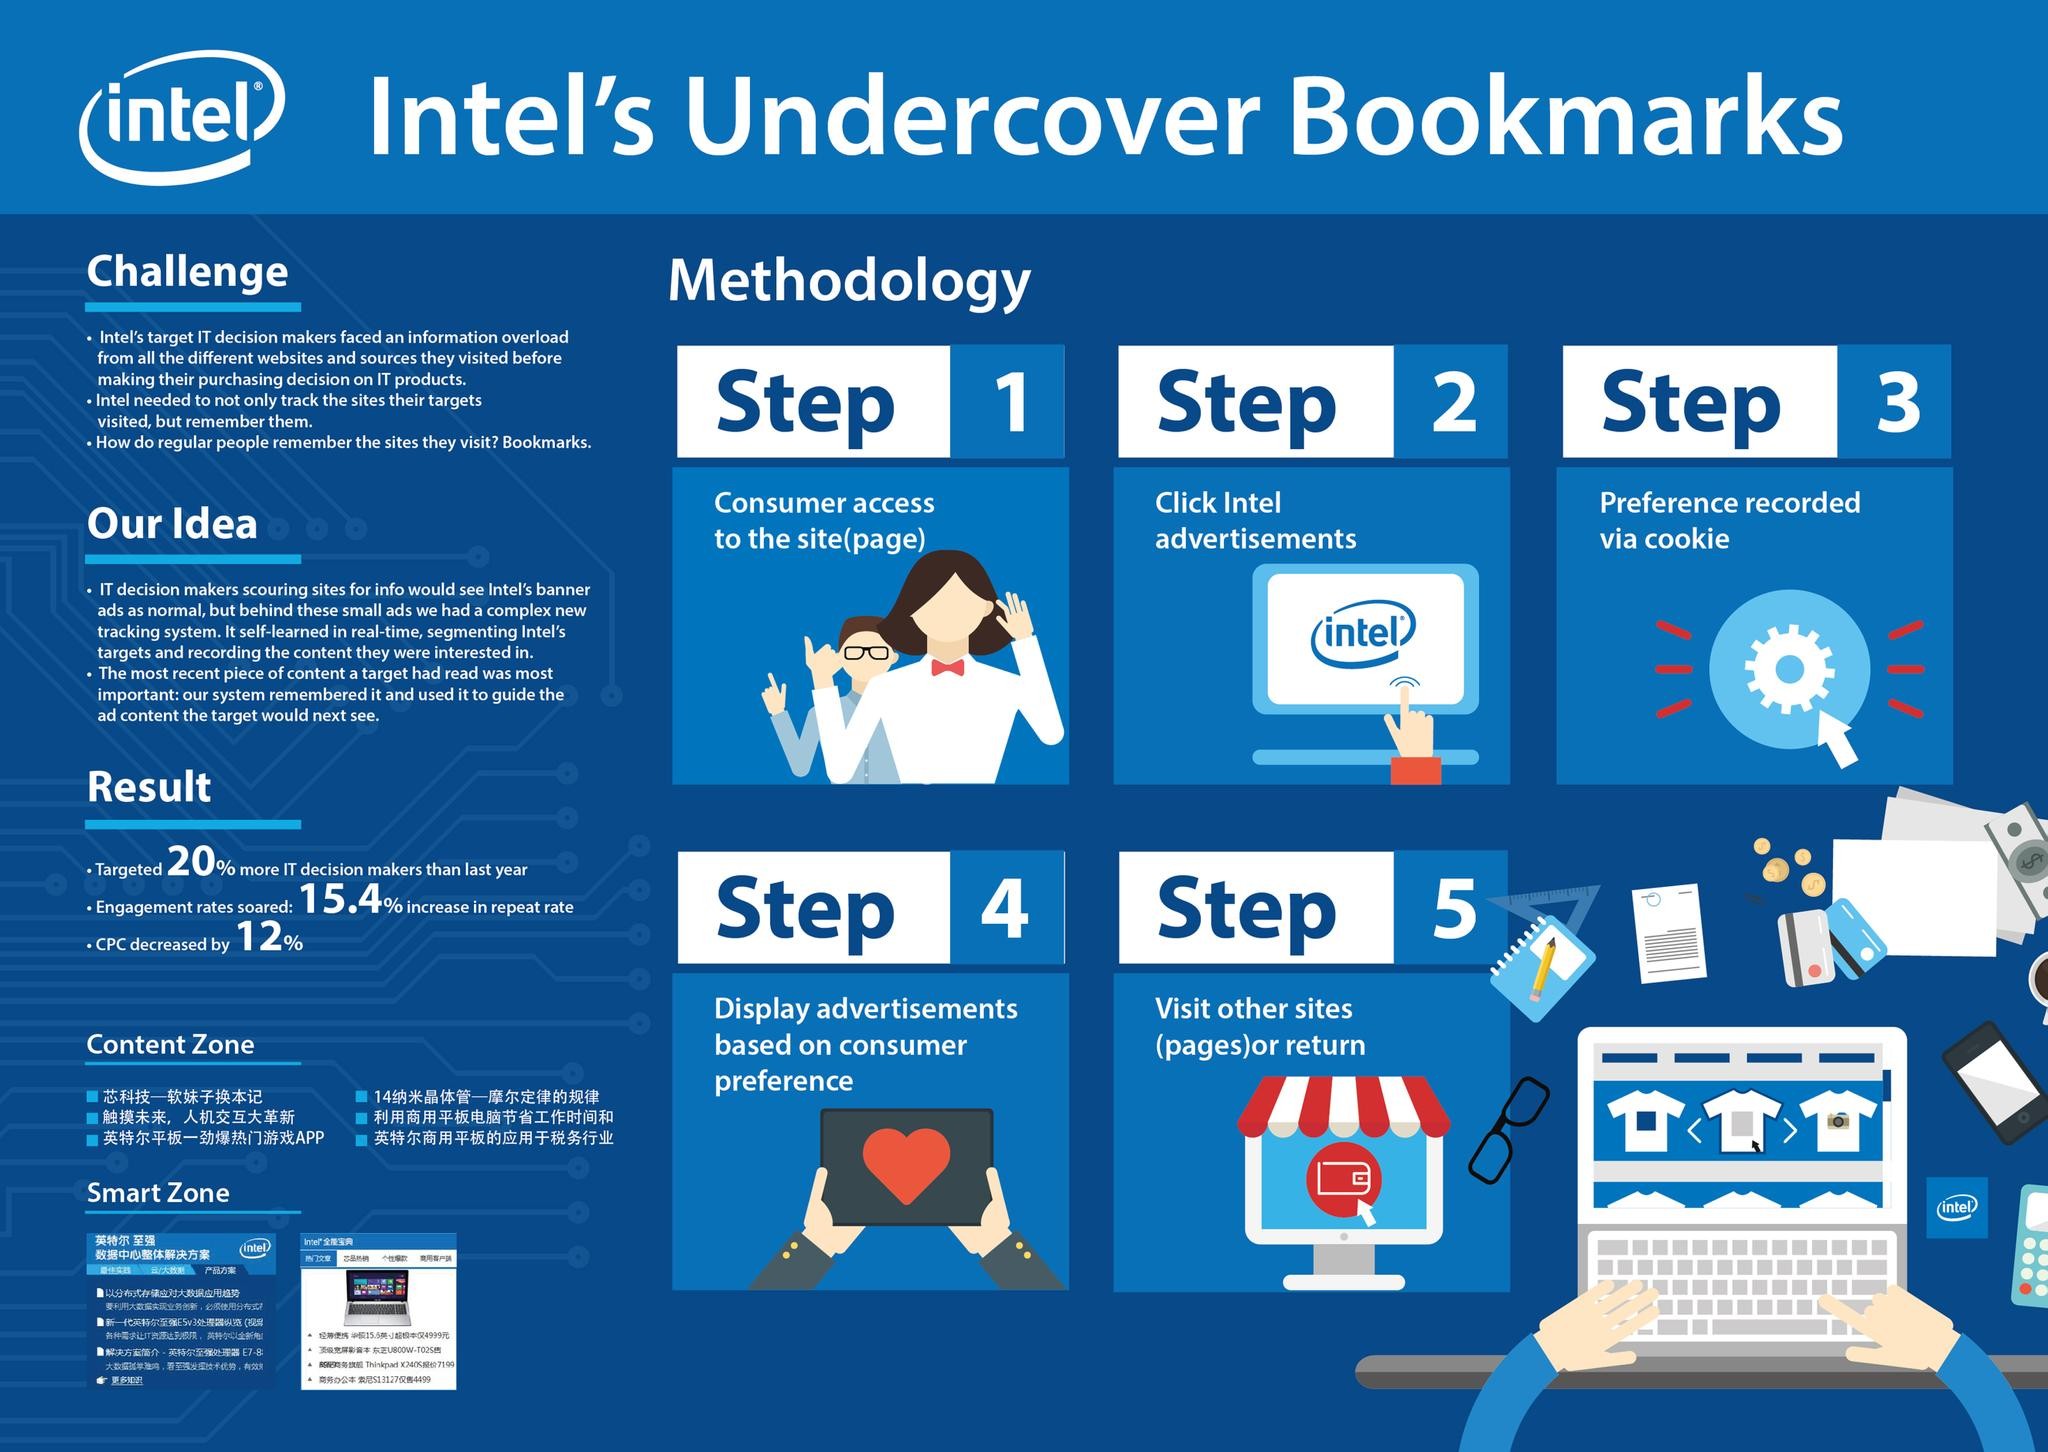 Intel Undercover Bookmarks